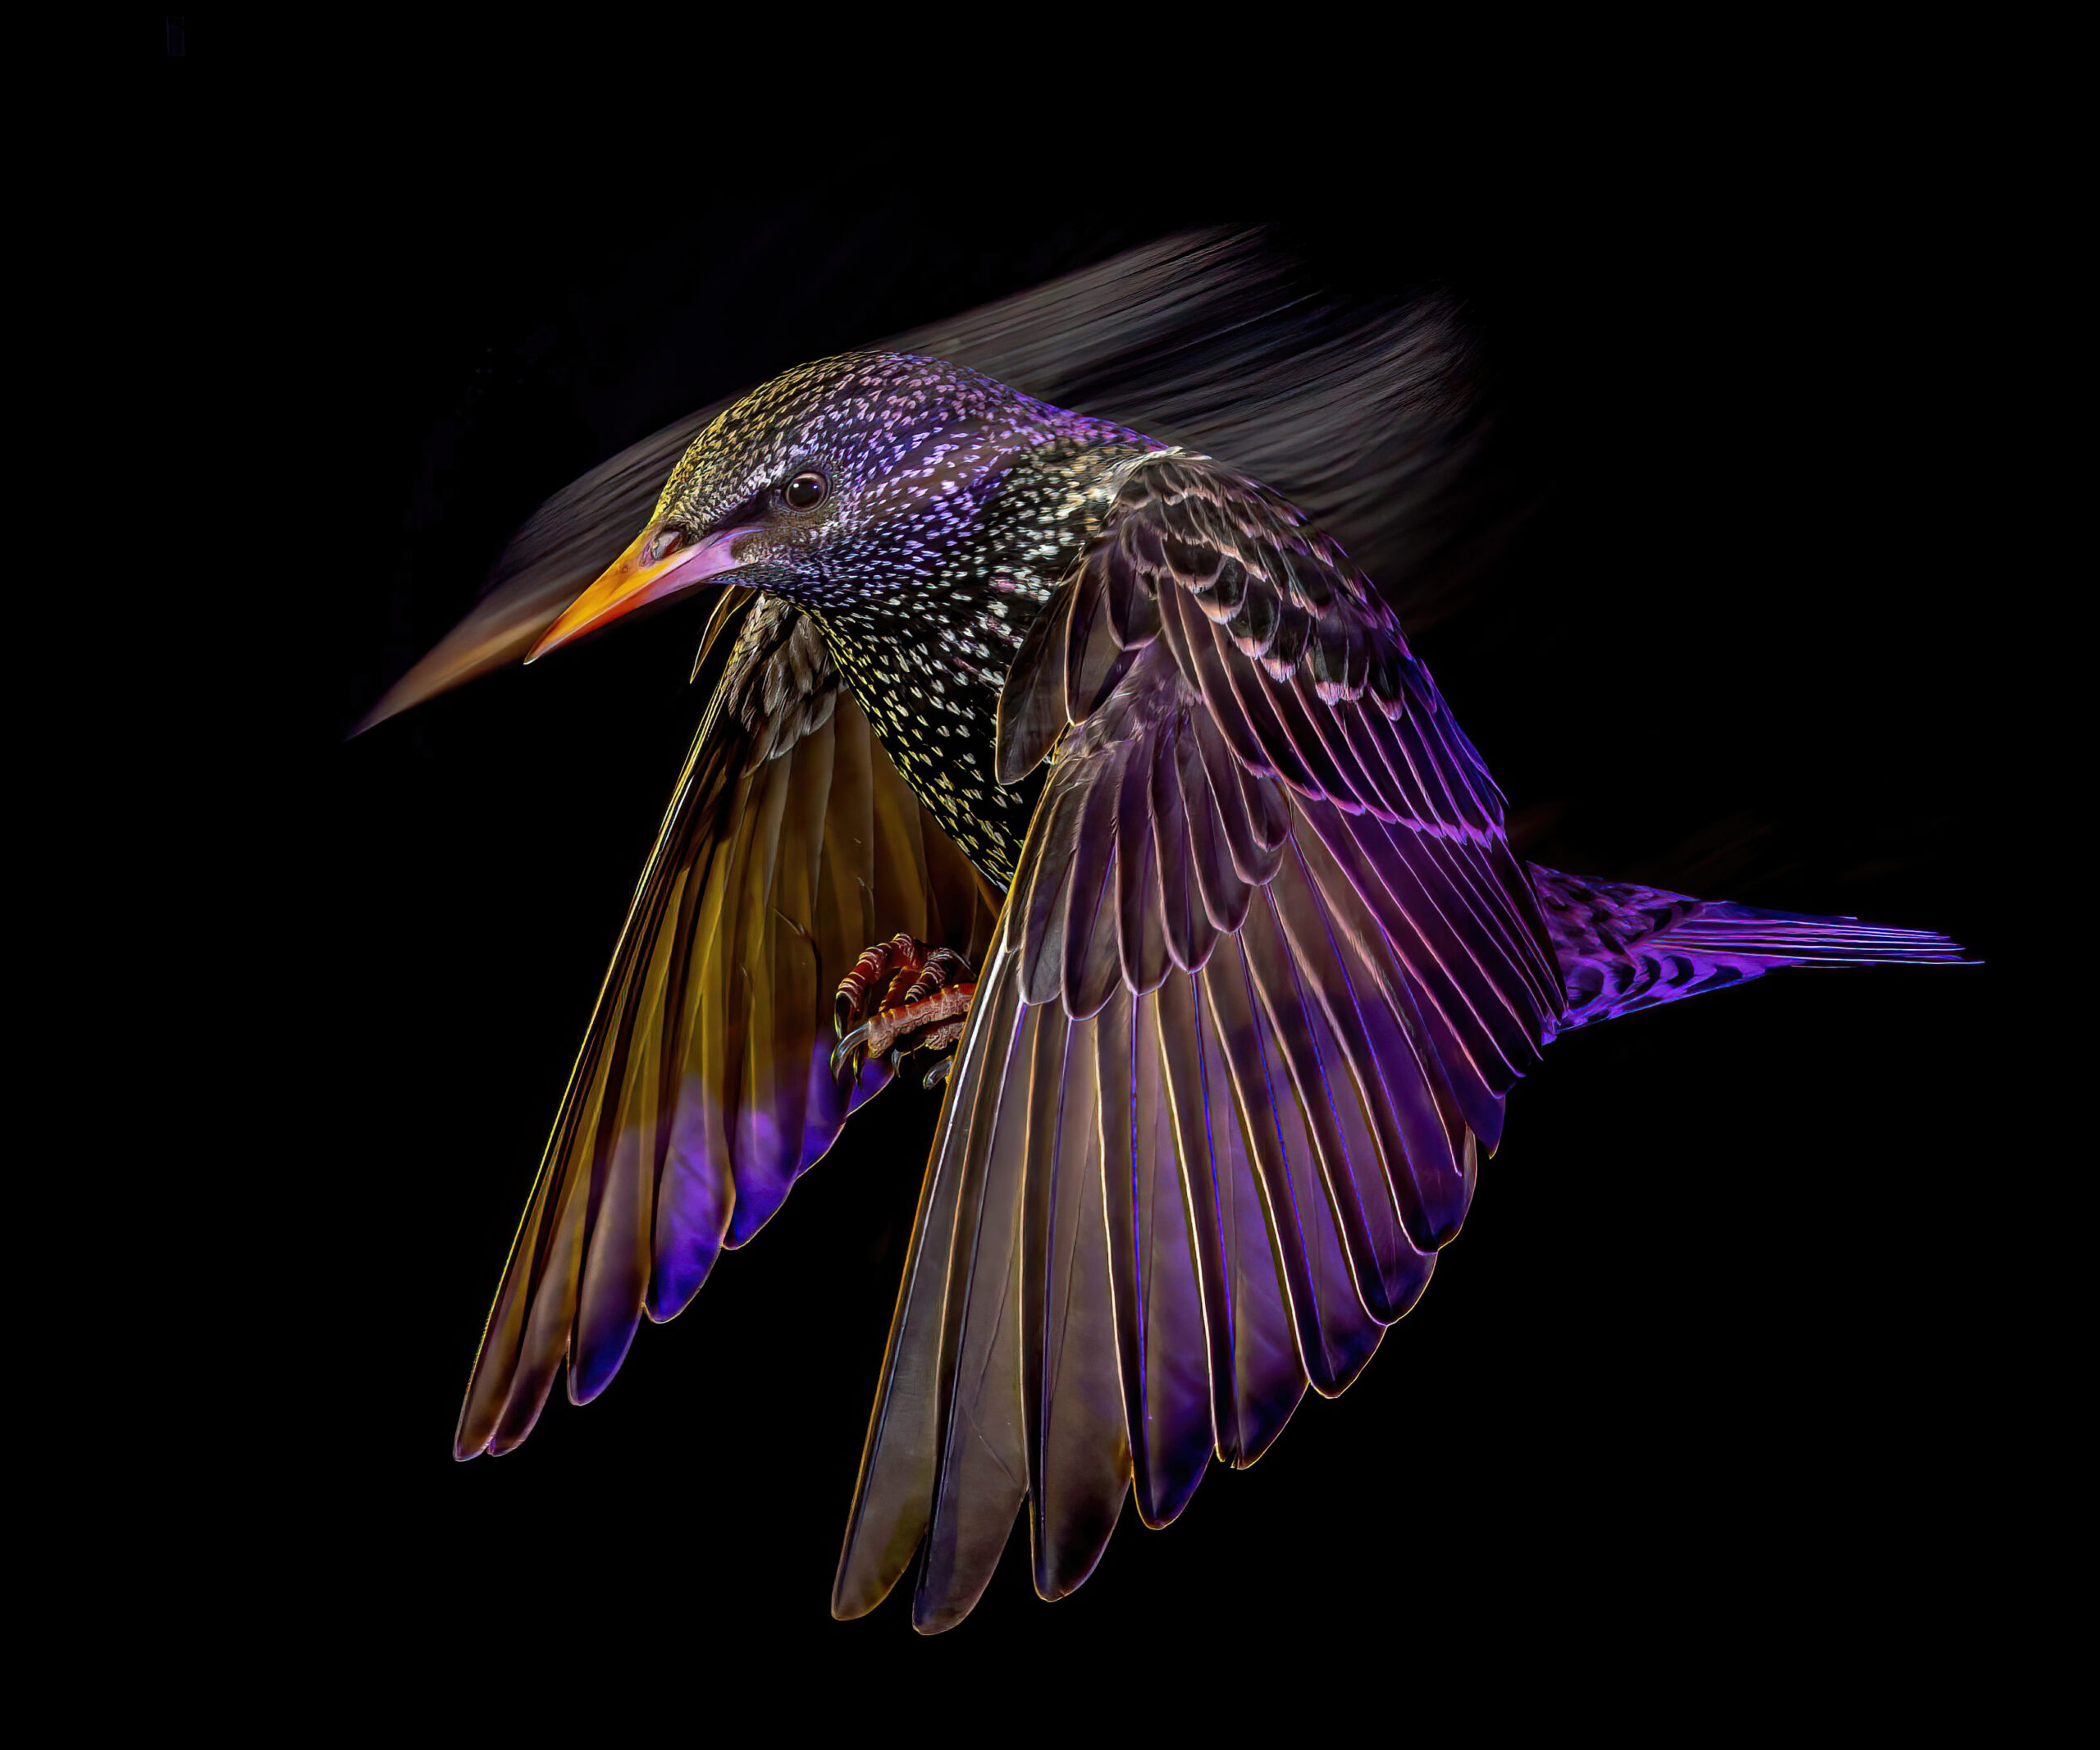 a bird with a purple ish hue is mid flight with its wings forward. the background is a deep black